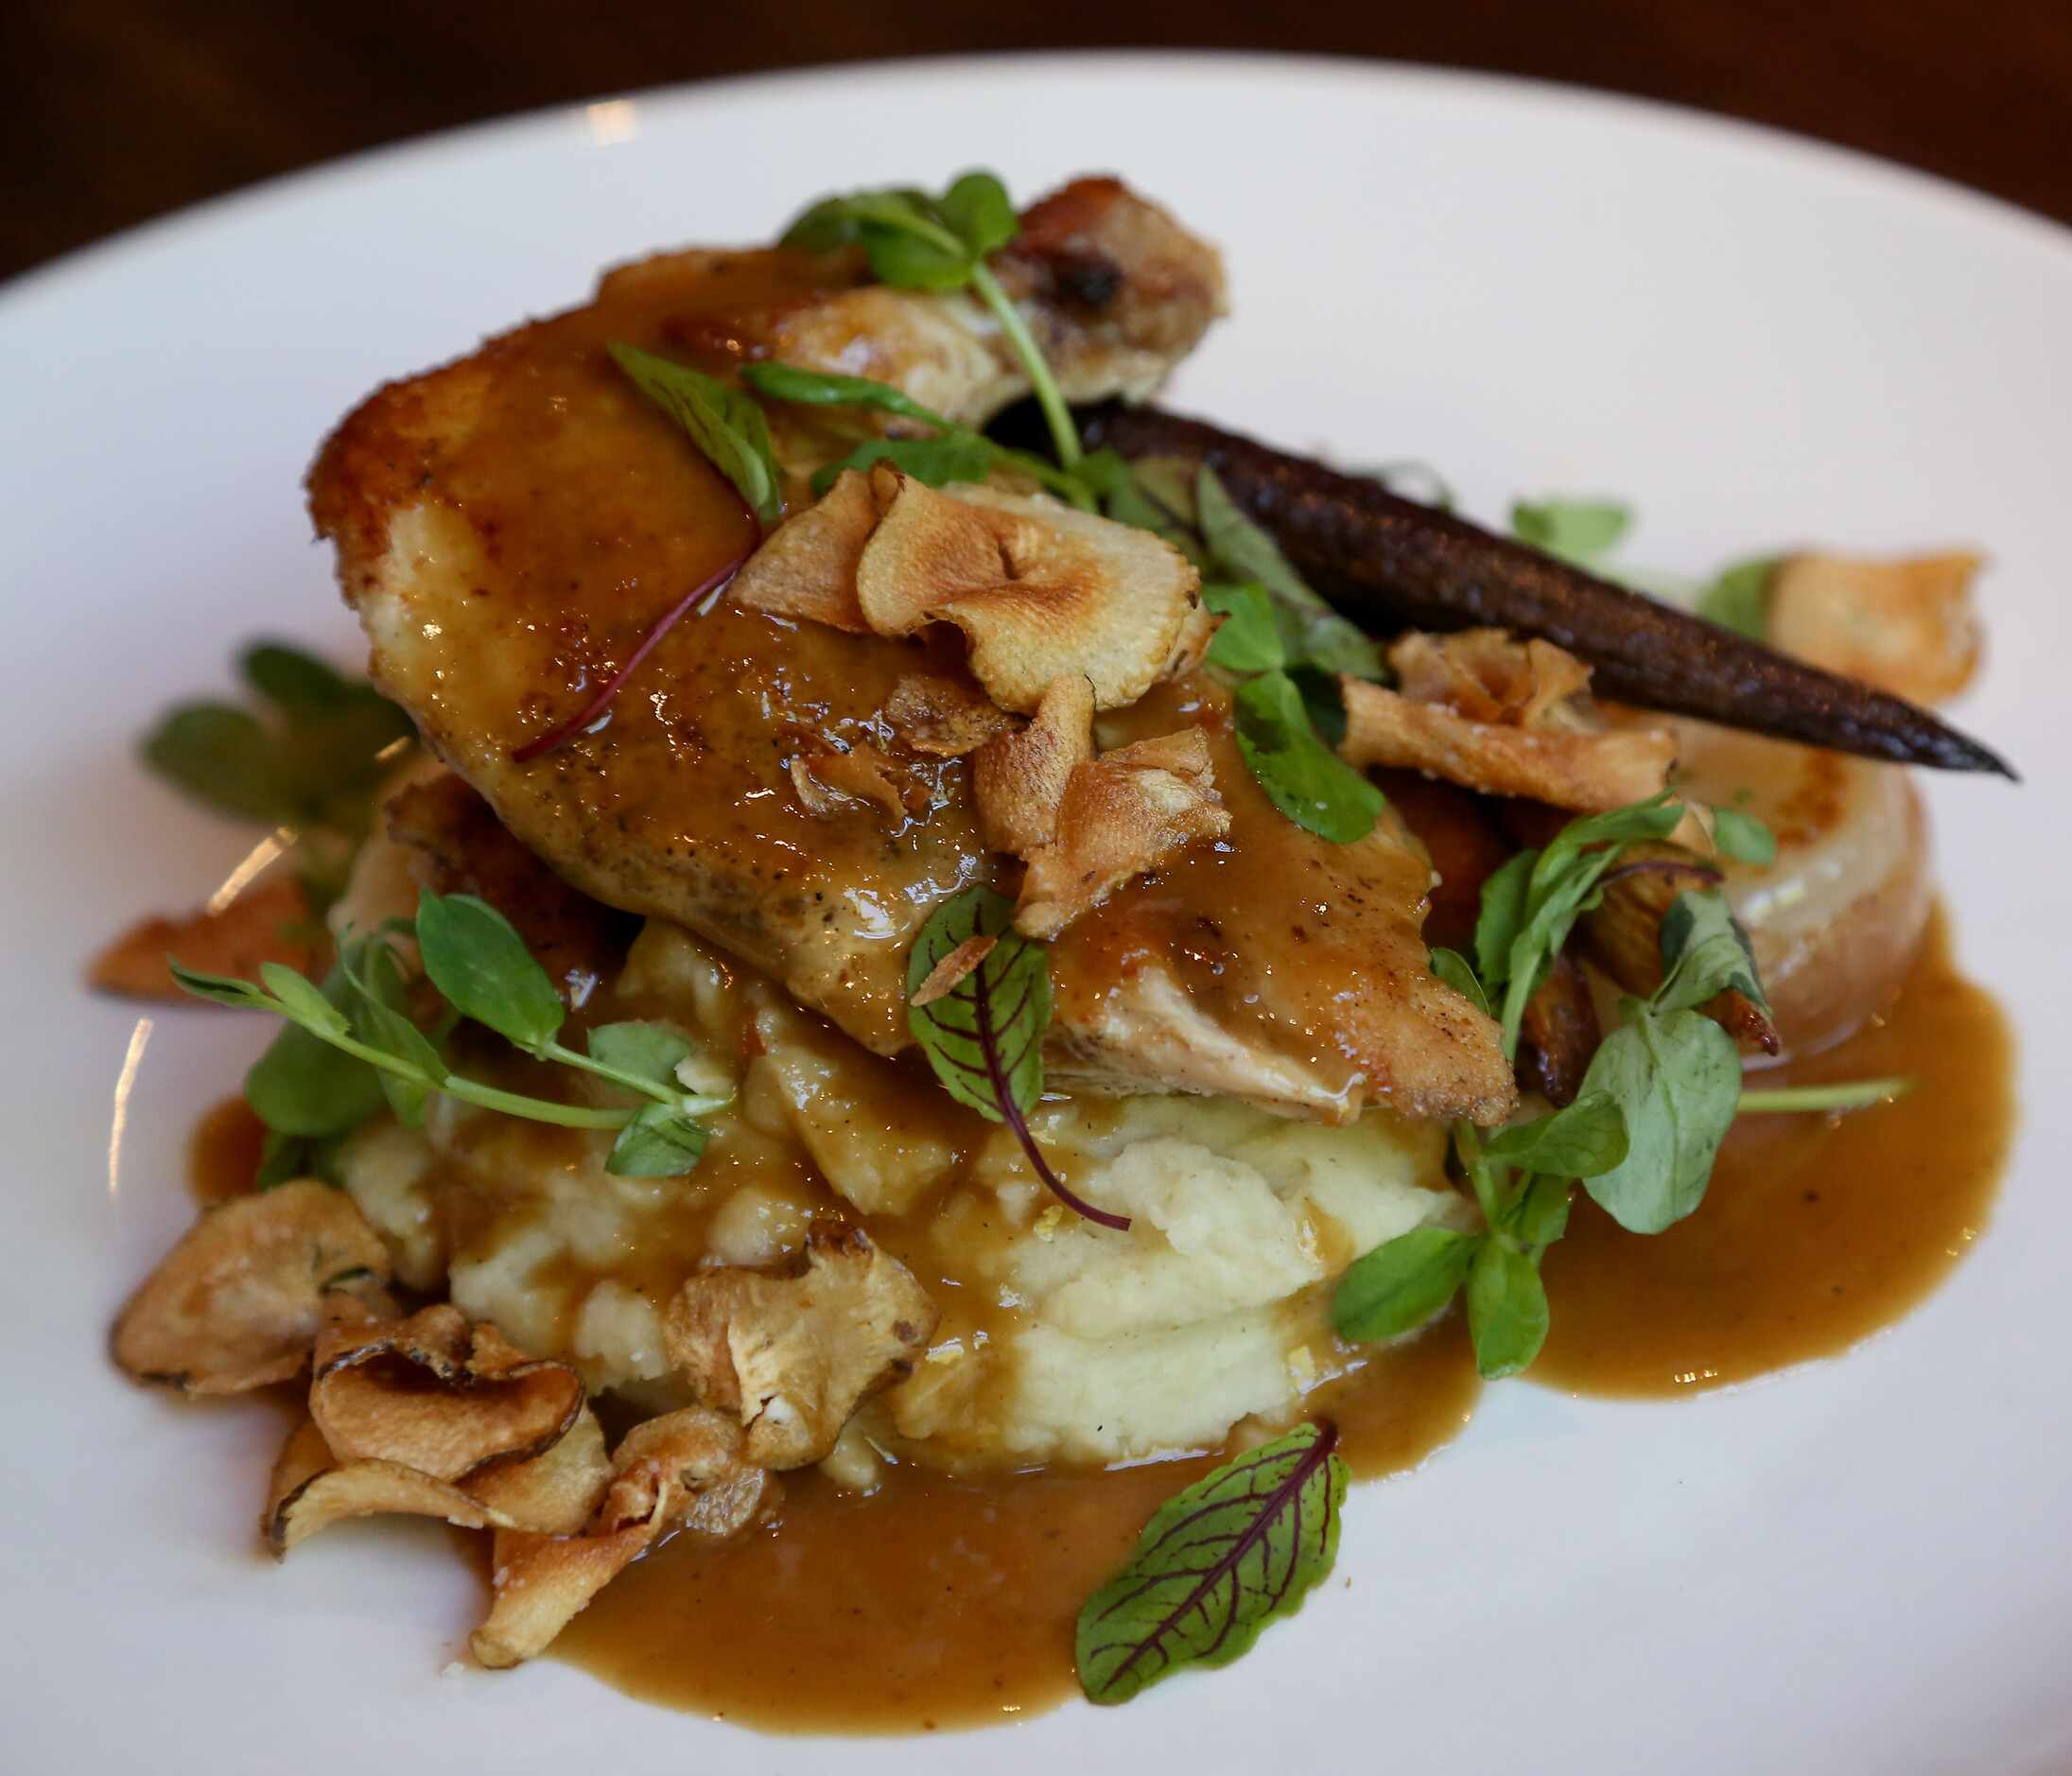 Over the years, Boulevardier's menu has included this chicken dish with sunchoke whipped...